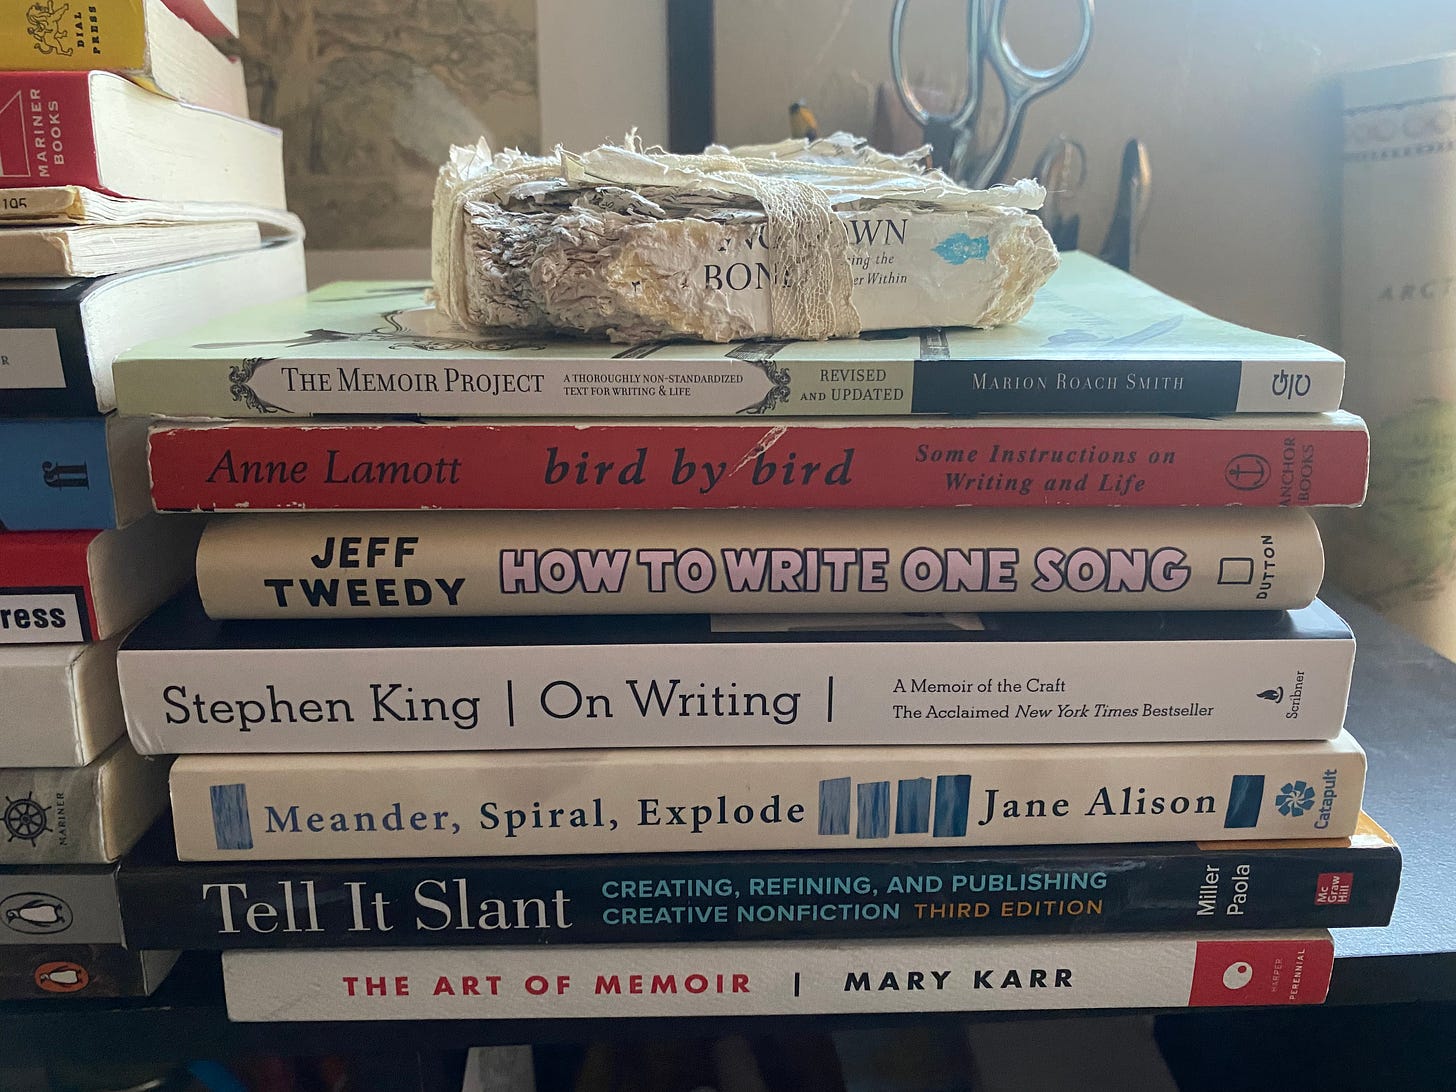 Eight writing books stacked on a shelf. The top book is chewed. ‘Writing Down the Bones’ by Natalie Goldberg, ‘The Memoir Project’ by Marion Roach Smith, ‘Bird by Bird’ by Anne Lamott, ‘How to Write One Song’ by Jeff Tweedy, ‘On Writing’ by Stephen King, ‘Meander, Spiral, Explode’ by Jane Alison, ‘Tell It Slant’ by Brenda Miller and Suzanne Paola, ‘The Art of Memoir’ by Mary Karr 